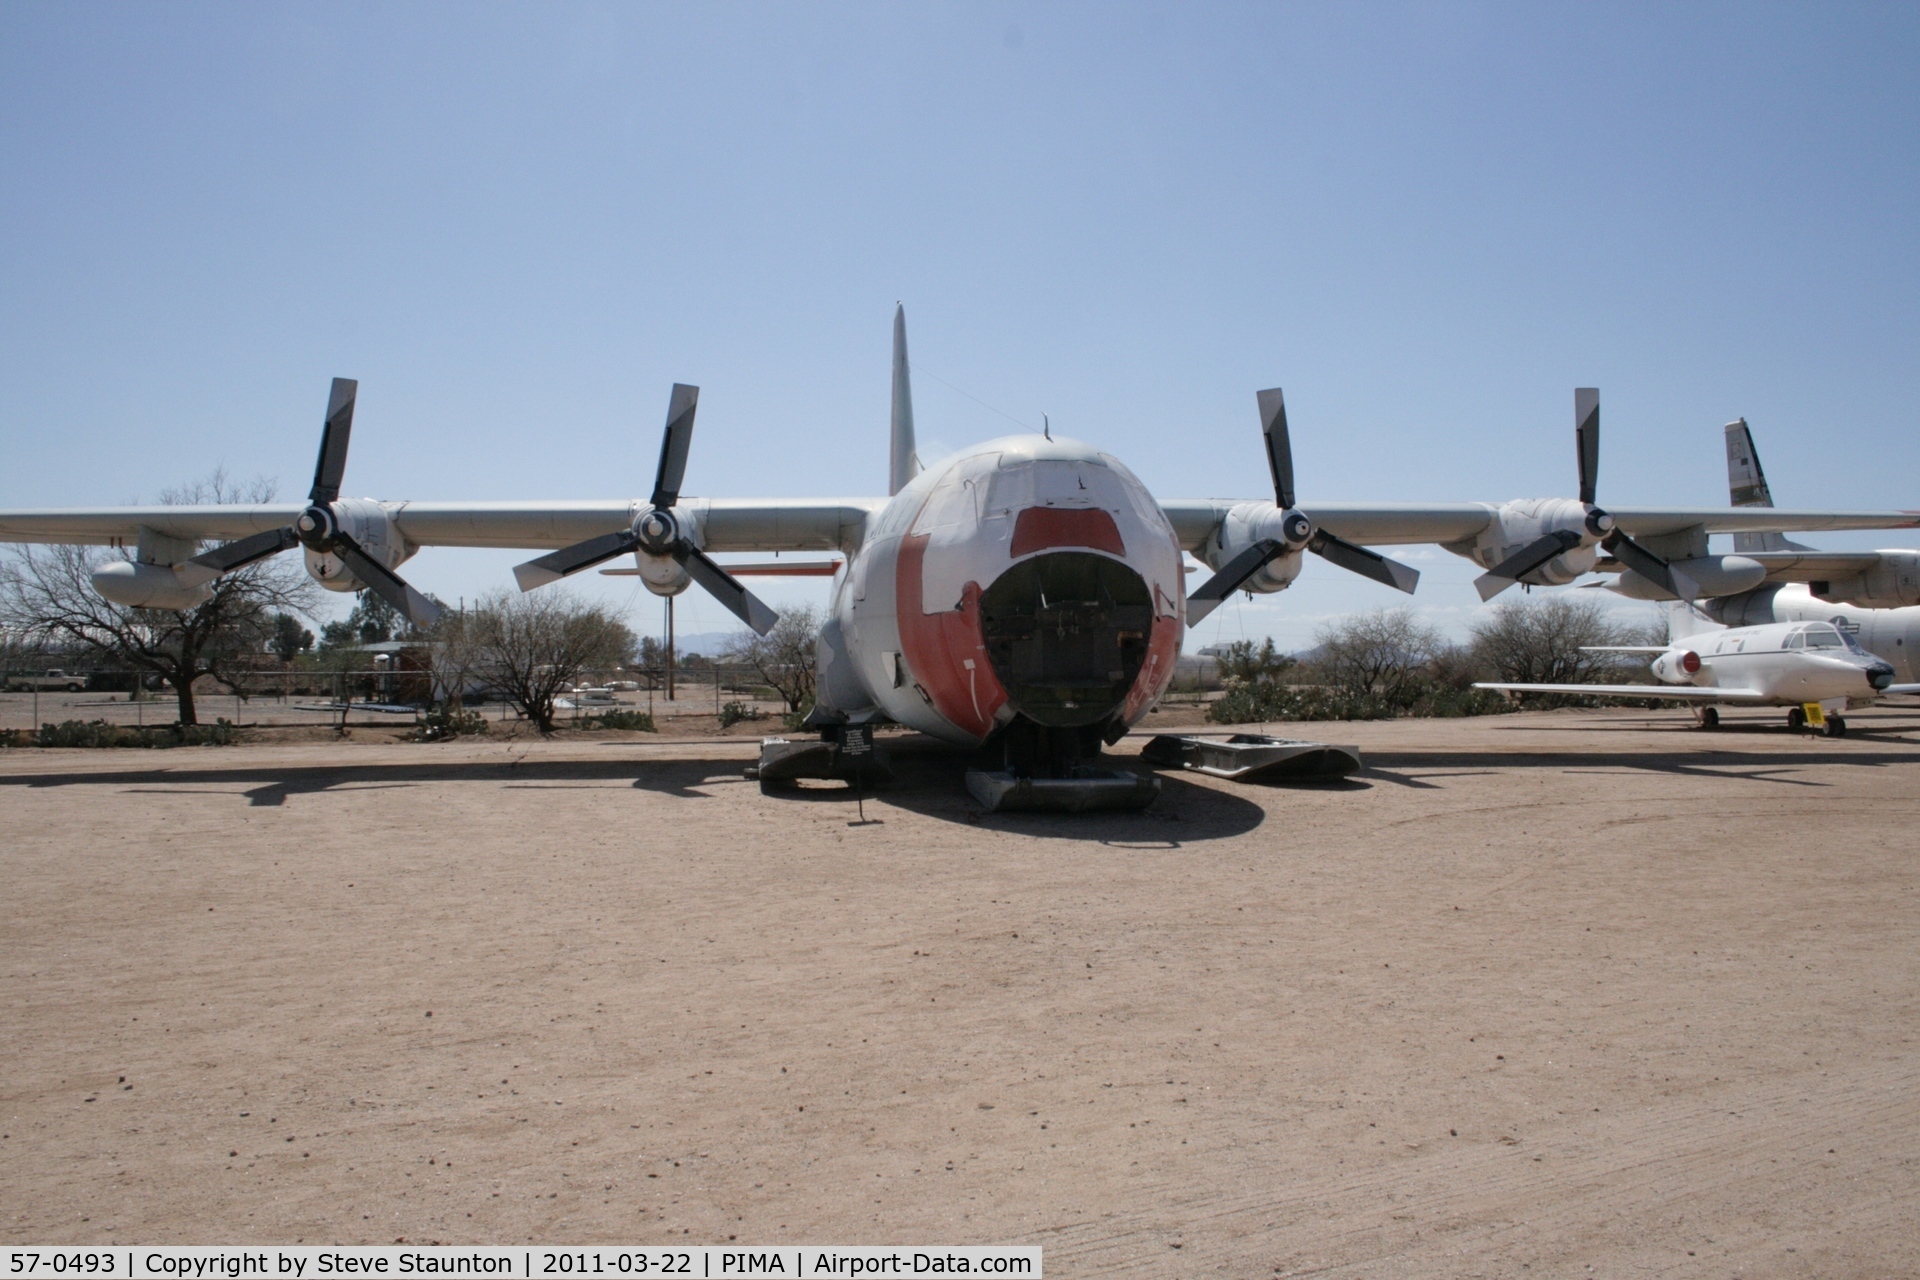 57-0493, 1957 Lockheed C-130D Hercules C/N 182-3200, Taken at Pima Air and Space Museum, in March 2011 whilst on an Aeroprint Aviation tour